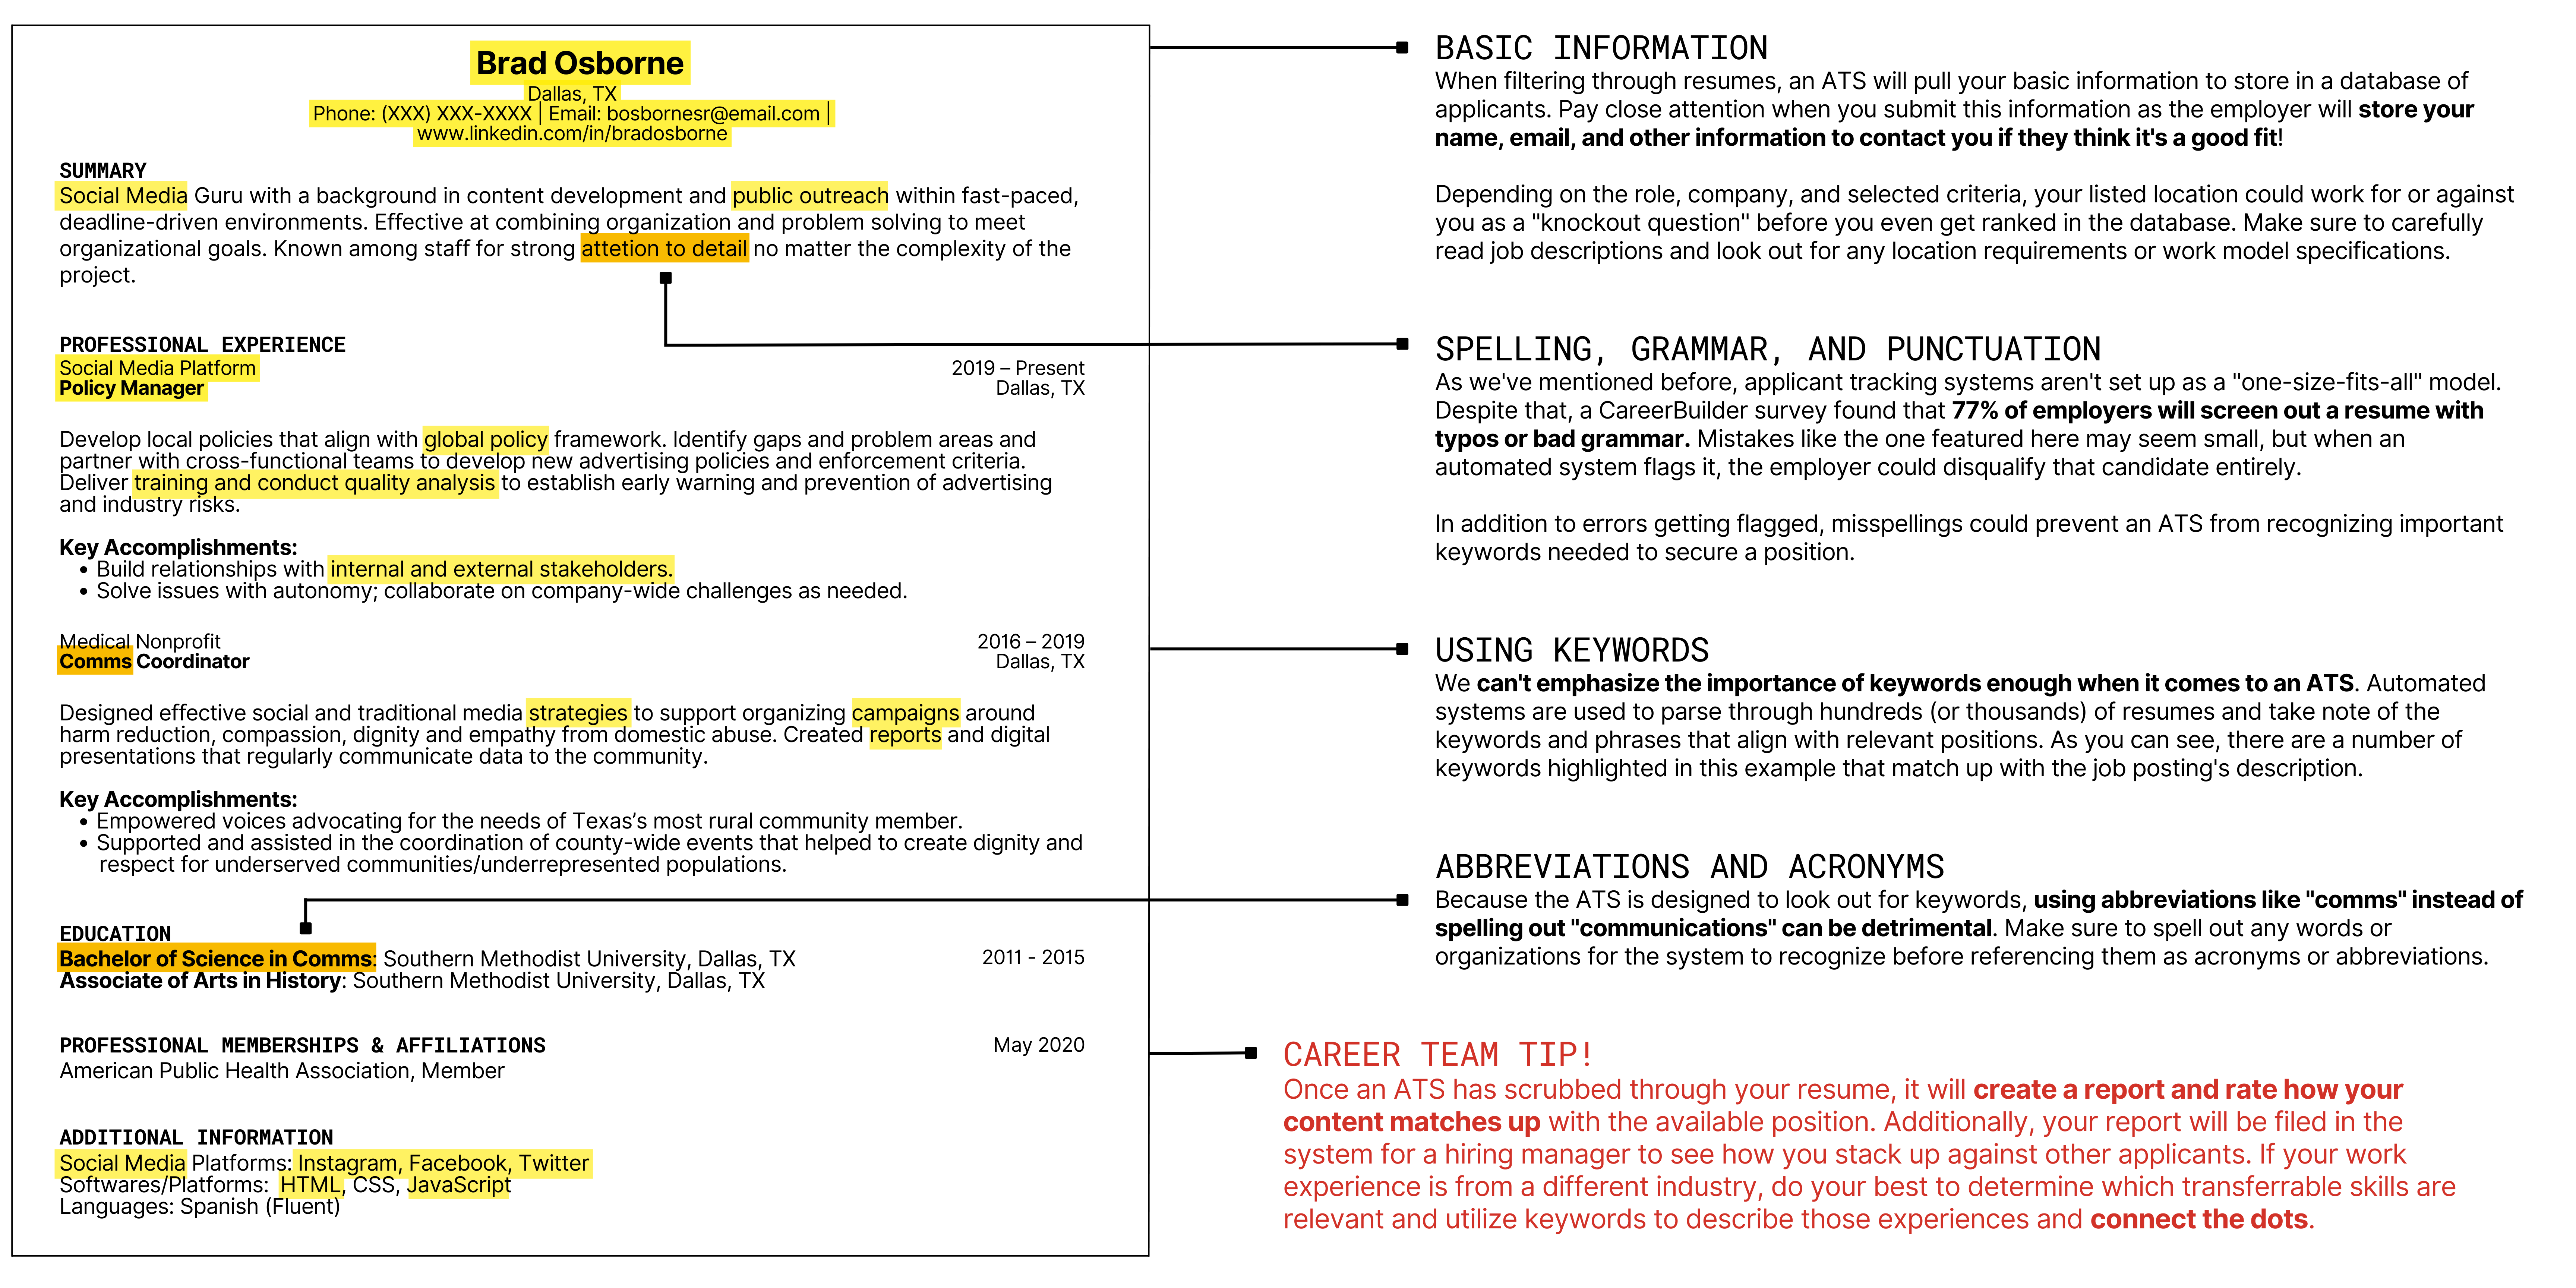 This is a diagram of a sample resume for a candidate listed in the ATS sample above. The diagram illustrates why the resume got the score it did on an ATS.